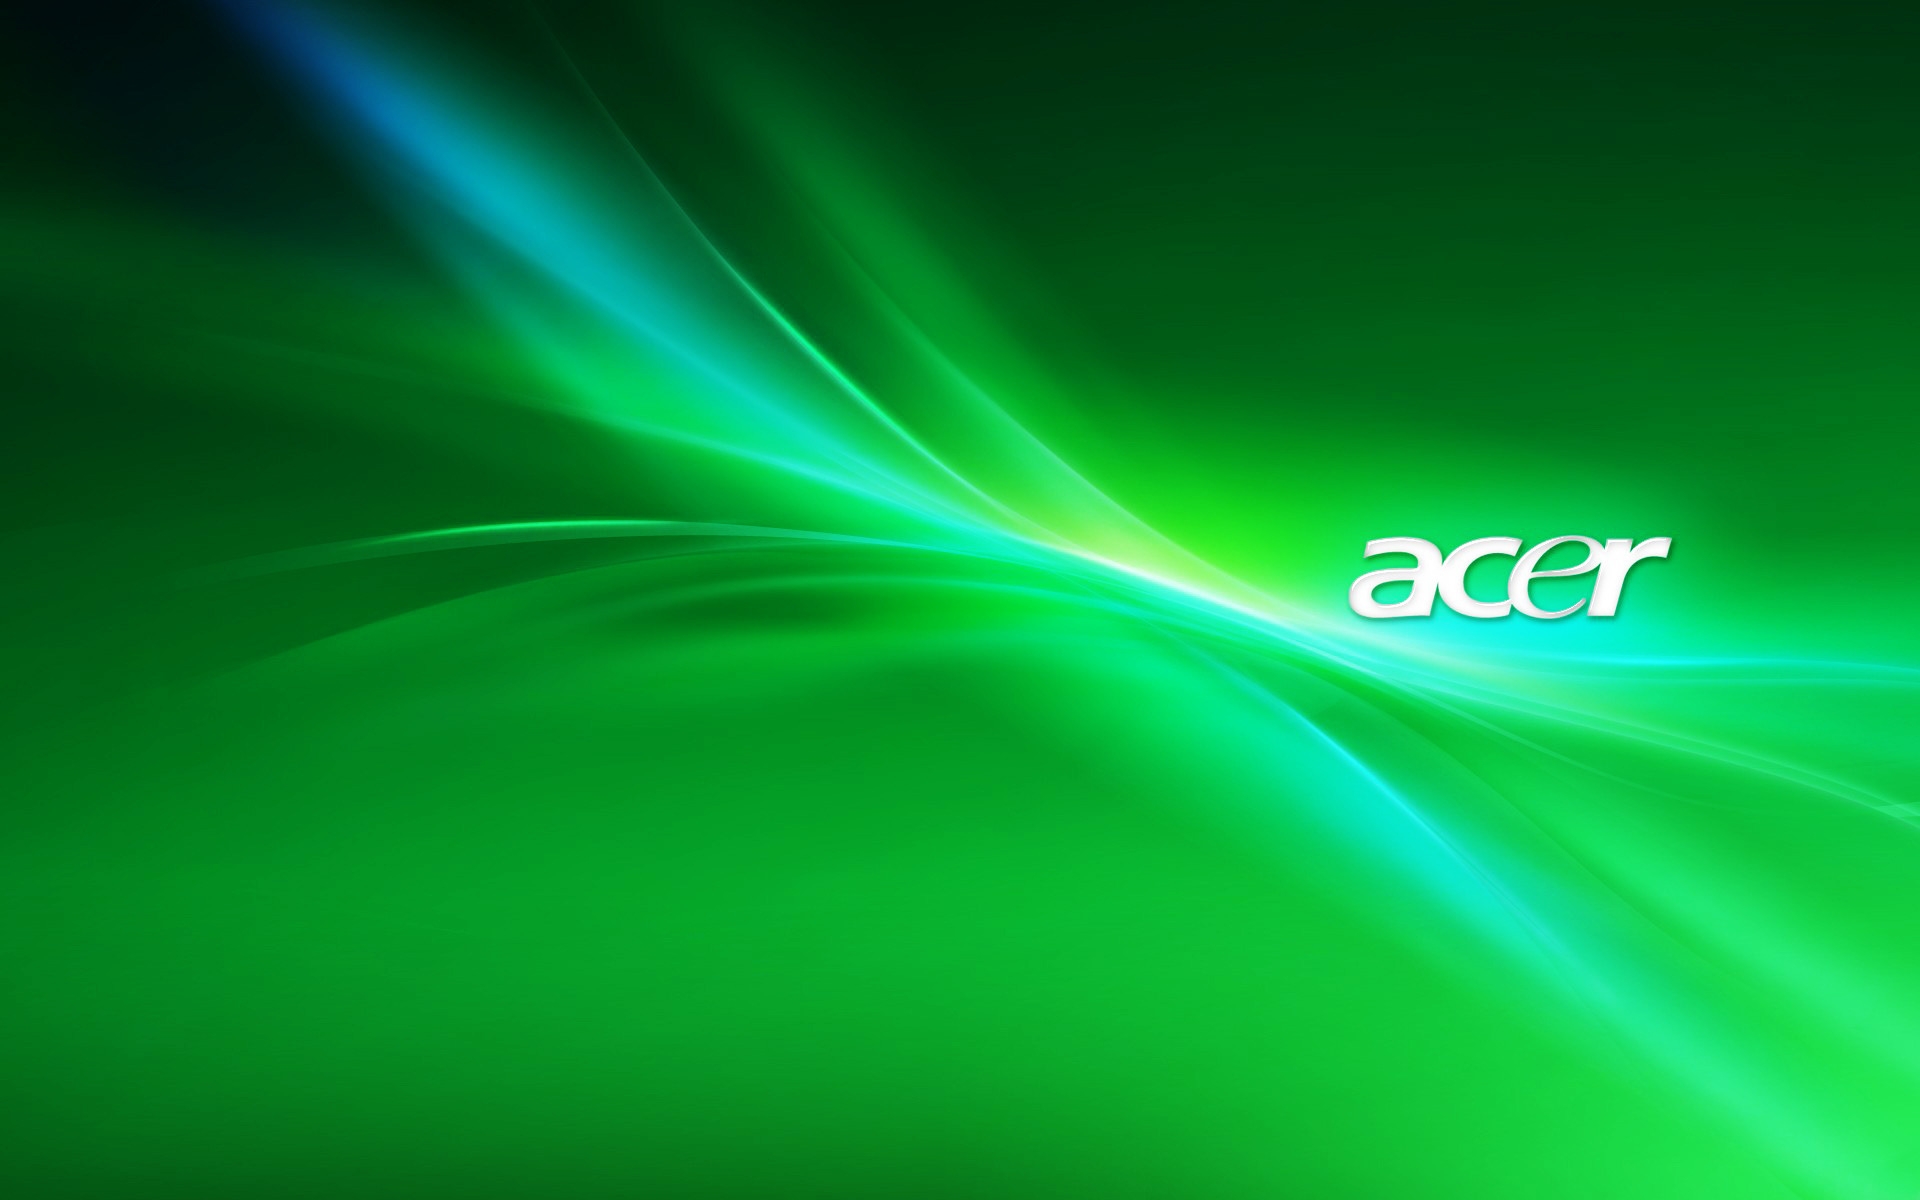 Acer Green for 1920 x 1200 widescreen resolution